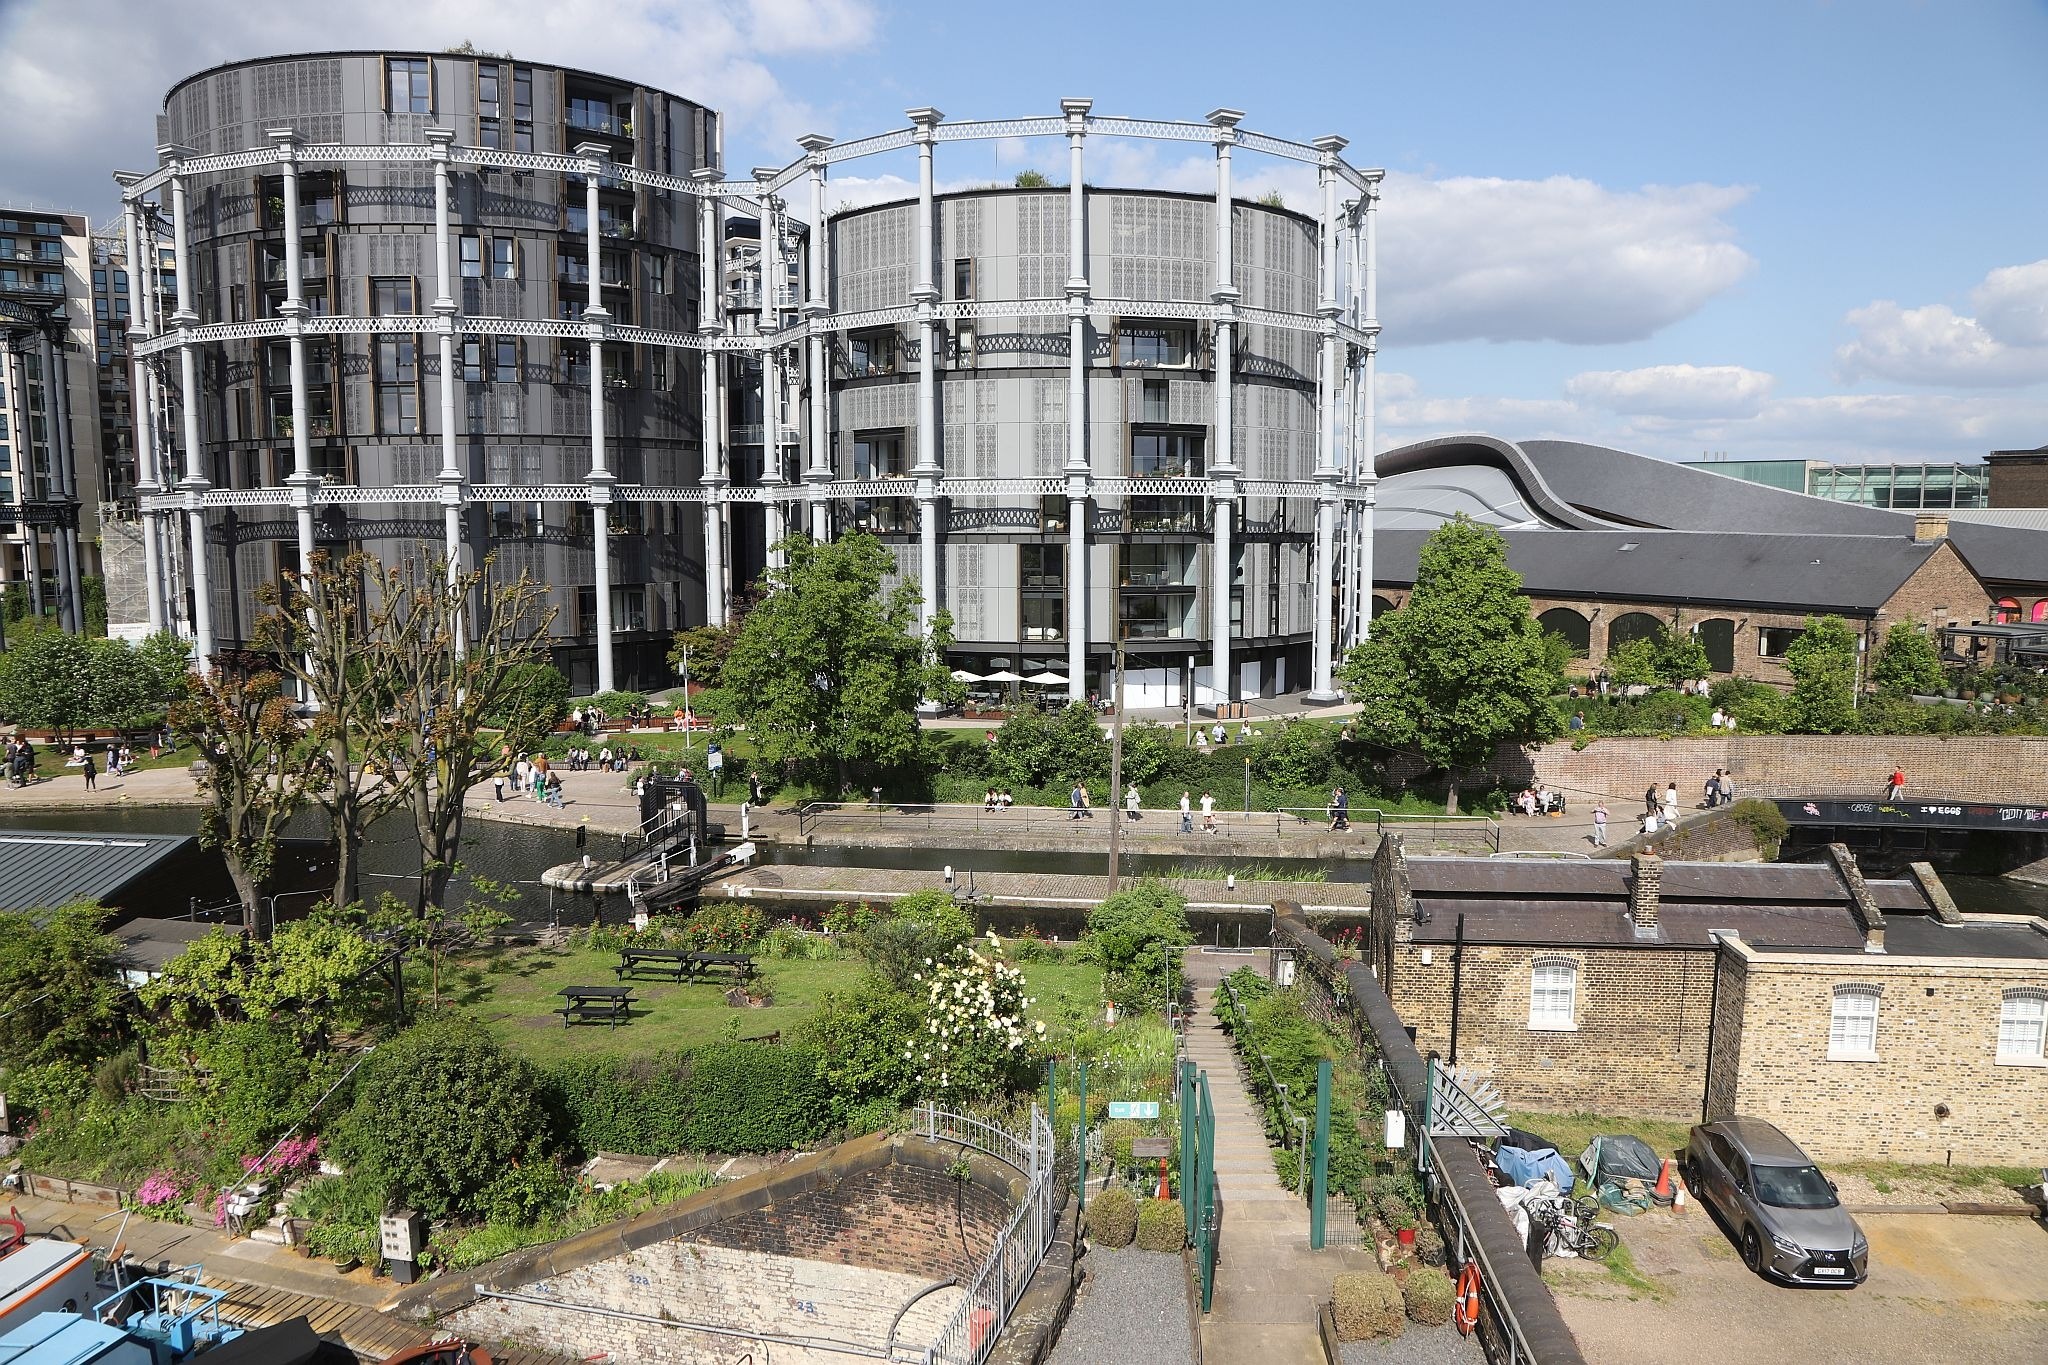 The view of Coal Drops Yard looking East from the St Pancras waterpoint. Water tower. King's Cross. Coal Drops Yard. Regents Canal. 20-May-2023.